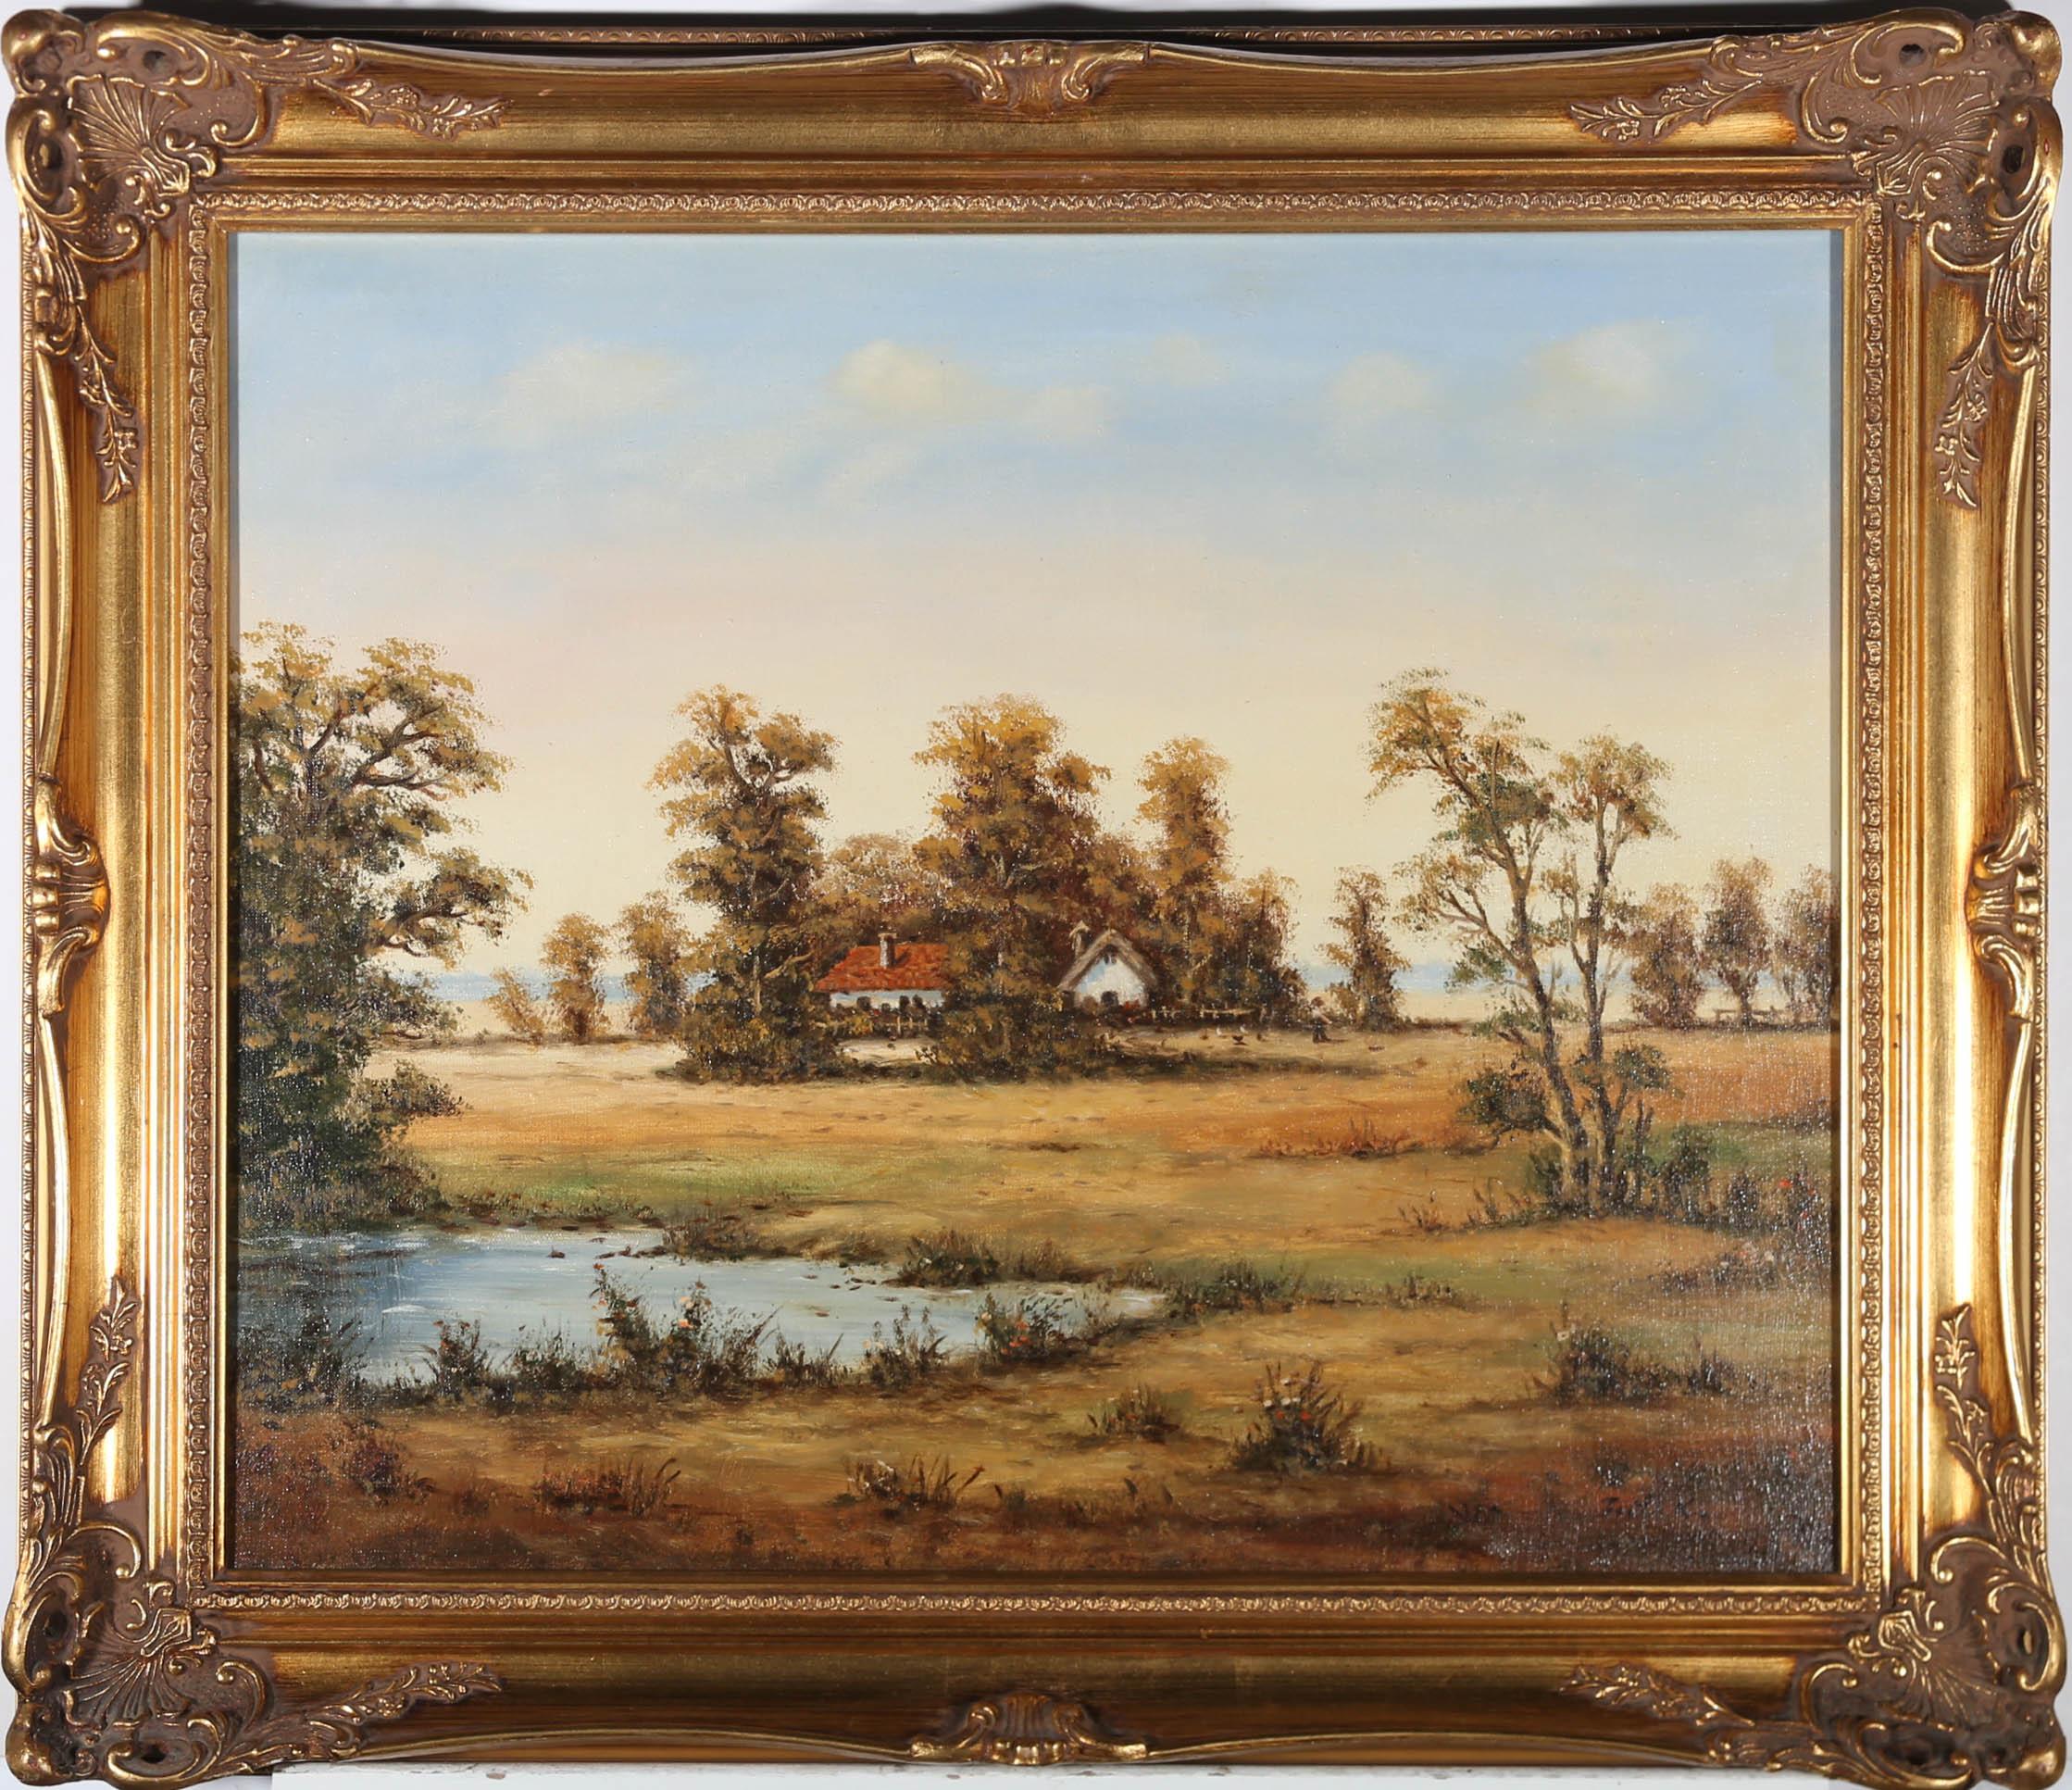 Unknown Landscape Painting - Framed 20th Century Oil - Rural Landscape with Cottages